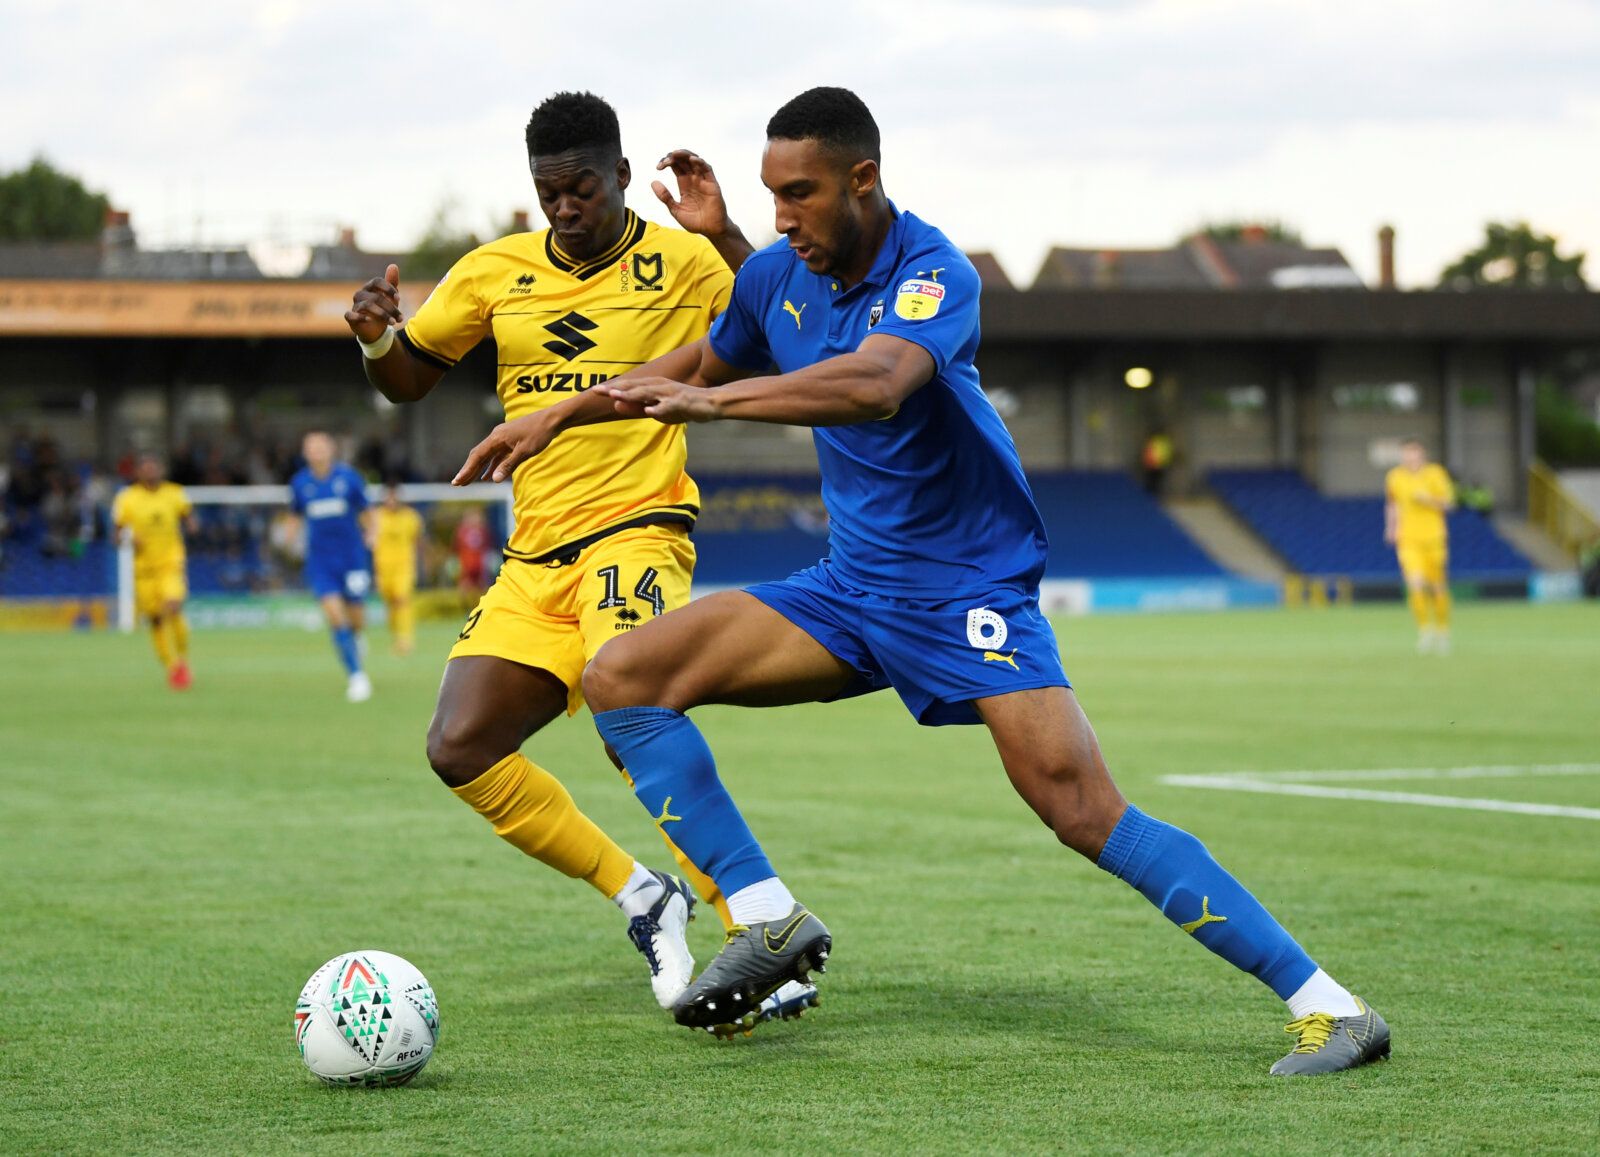 Soccer Football - Carabao Cup First Round - AFC Wimbledon v Milton Keynes Dons - Kingsmeadow, London, Britain - August 13, 2019  AFC Wimbledon's Terrell Thomas in action with MK Dons' Kieran Agard   Action Images/Tony O'Brien  EDITORIAL USE ONLY. No use with unauthorized audio, video, data, fixture lists, club/league logos or 